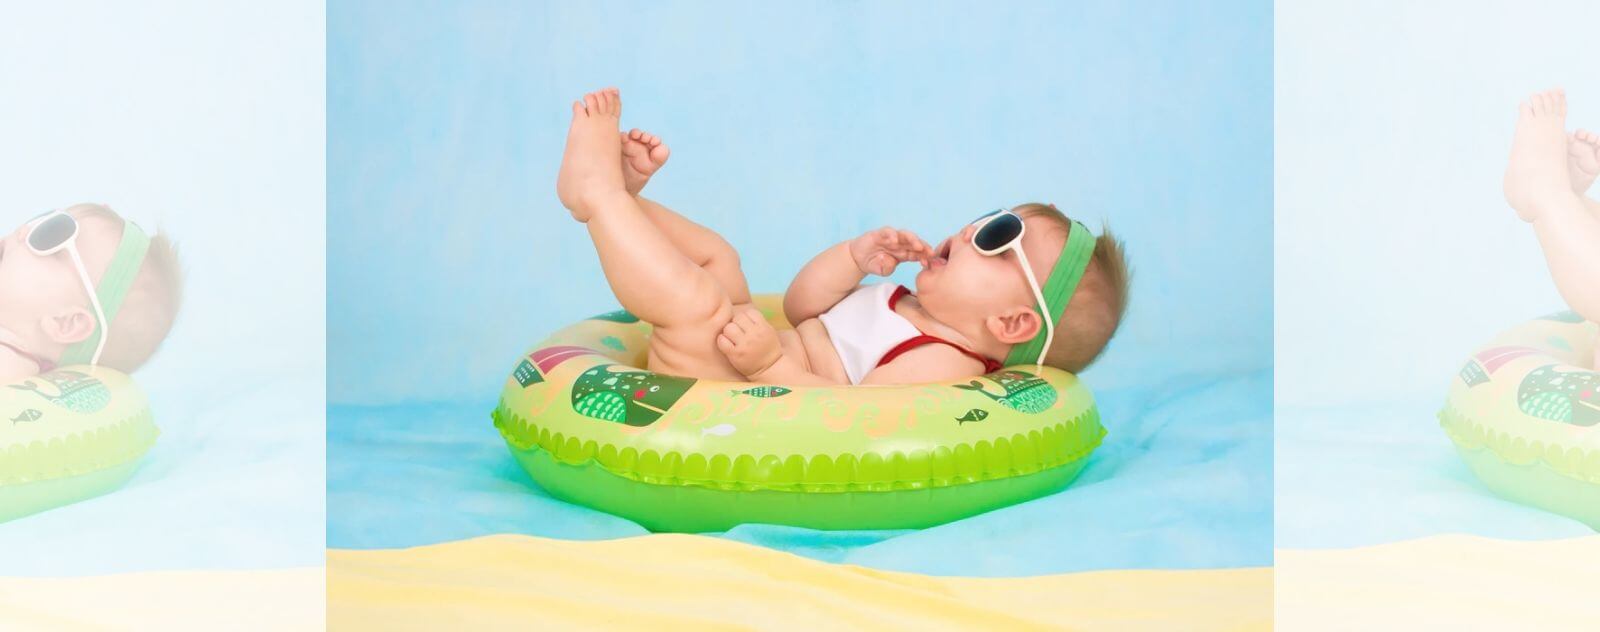 Baby Sleeping in a Swimming Pool